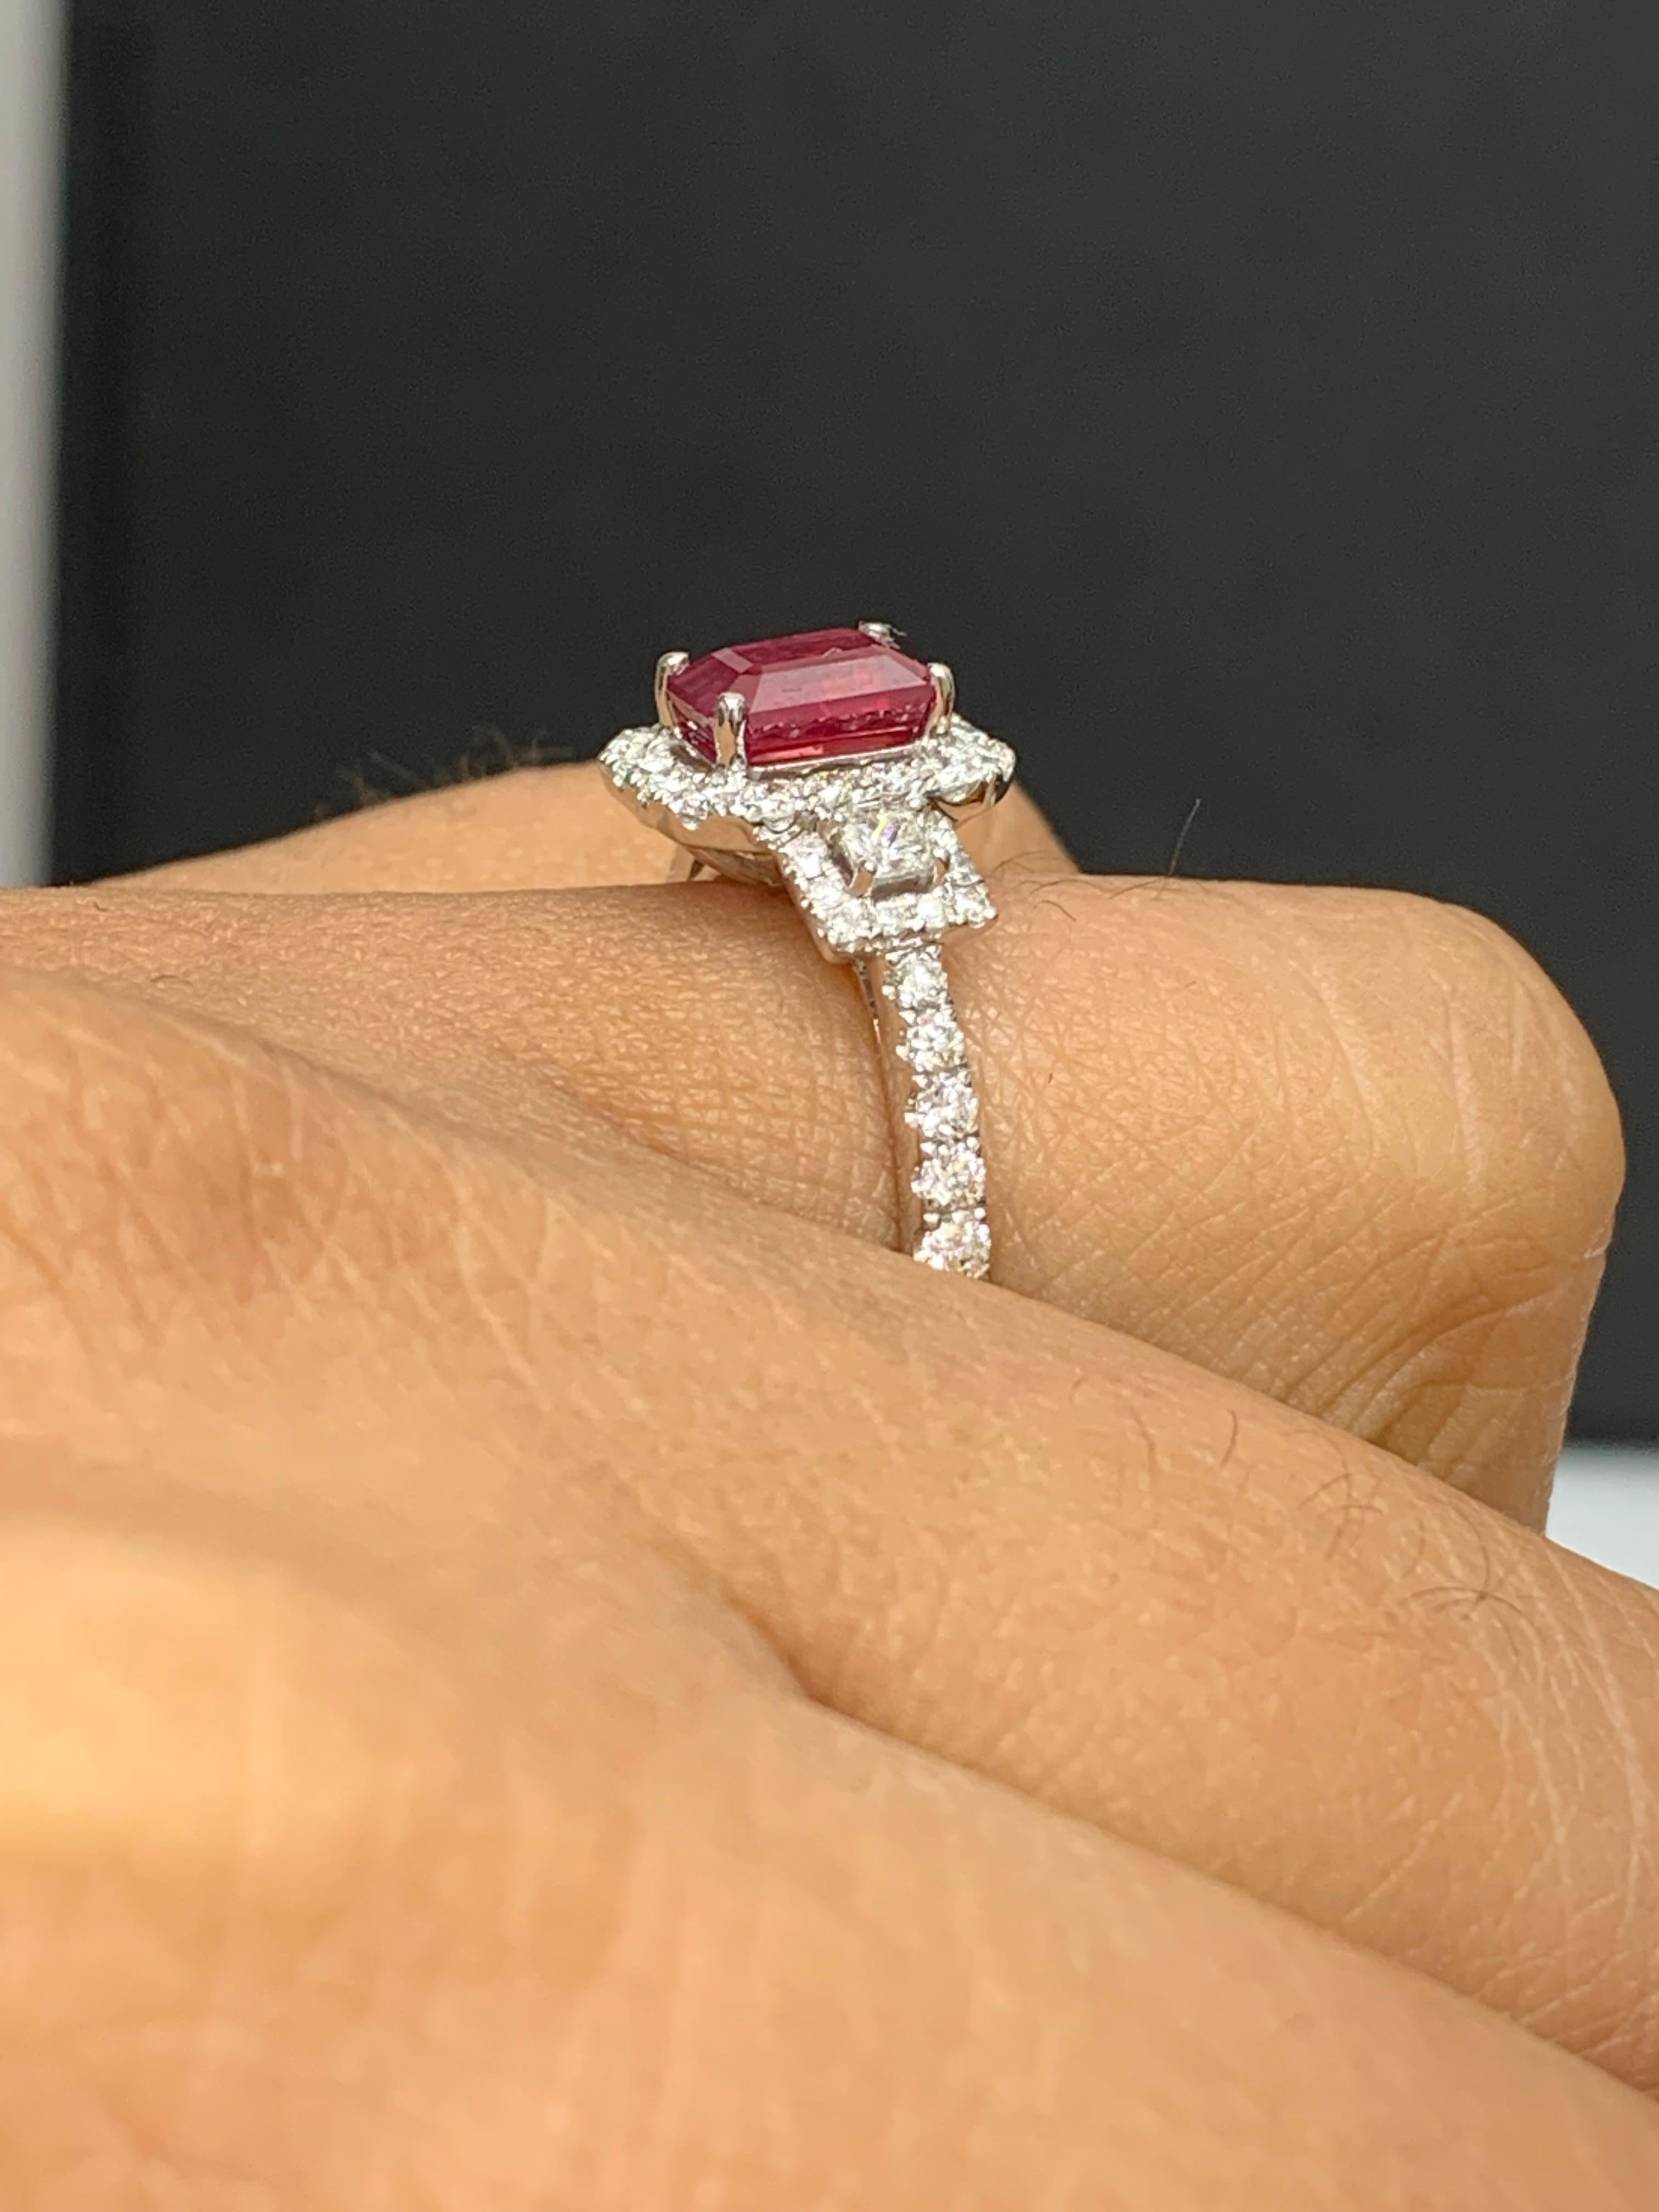 1.43 Carat Emerald Cut Ruby and Diamond Halo Ring in 18K White Gold For Sale 6